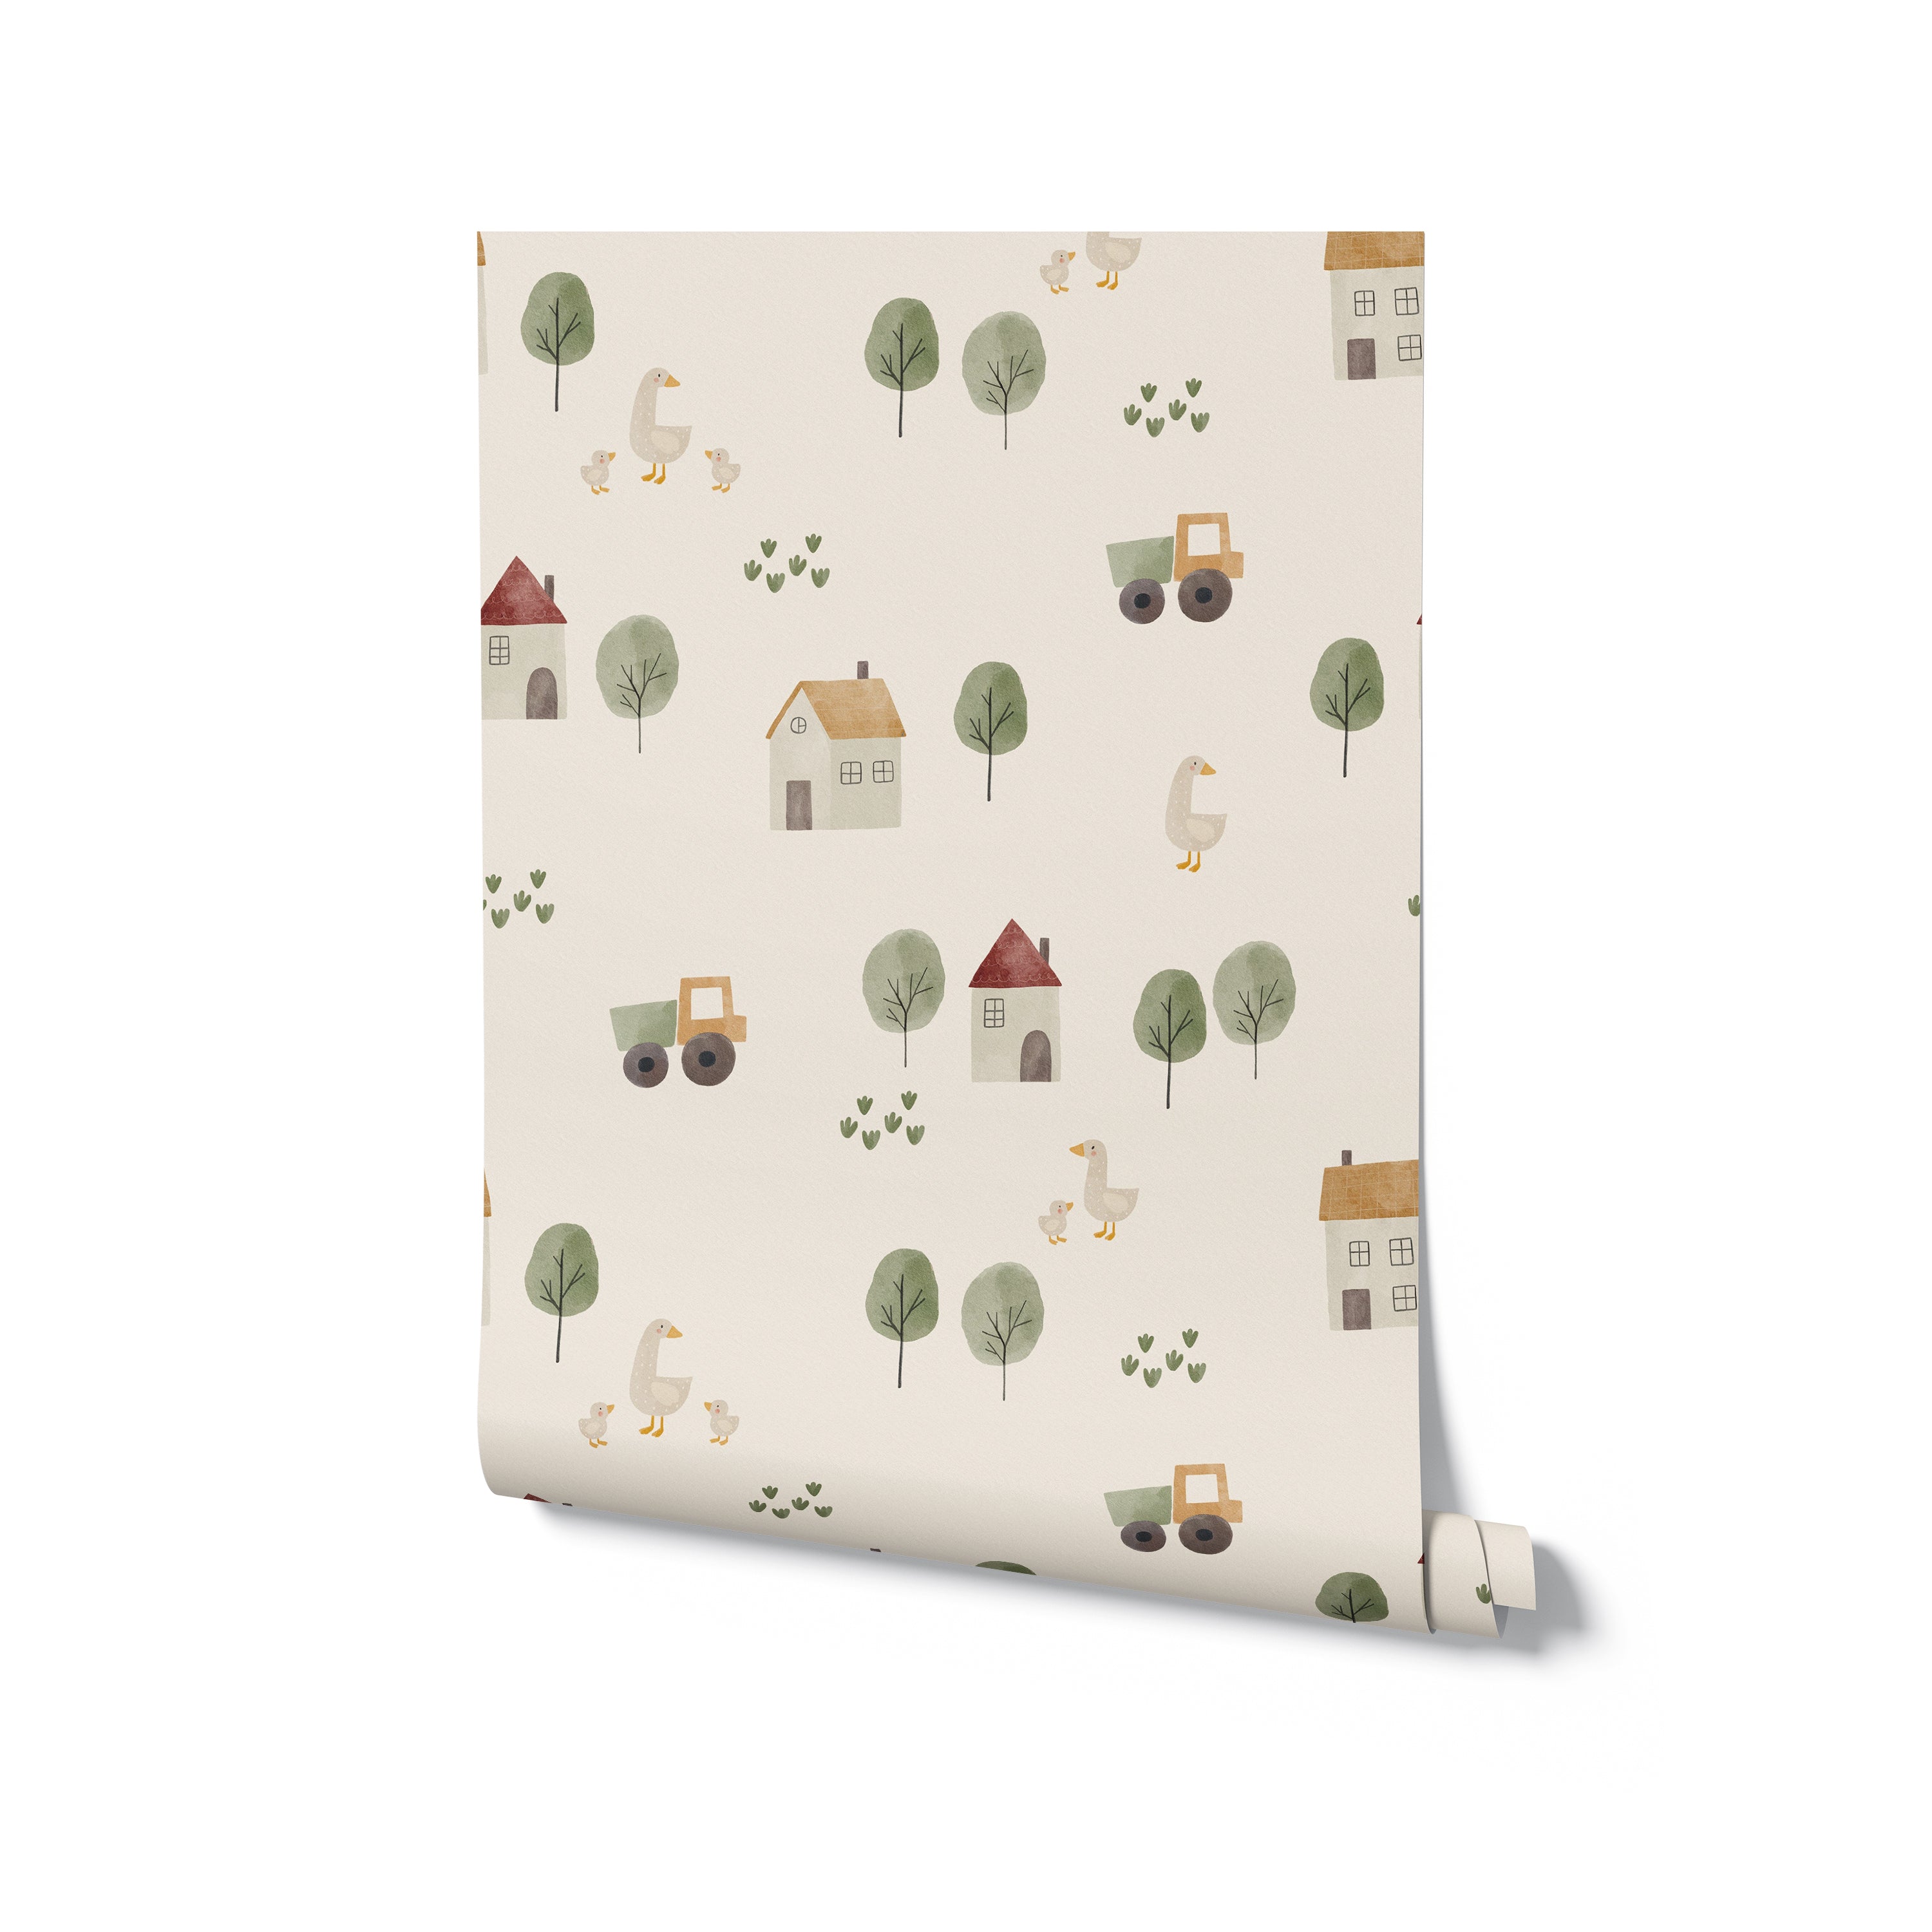 A roll of Farm Friend Wallpaper - Happy Goslings, displaying a delightful pattern of houses, trees, tractors, geese with goslings, and grass on an ecru background, perfect for adding a touch of whimsy to any room.